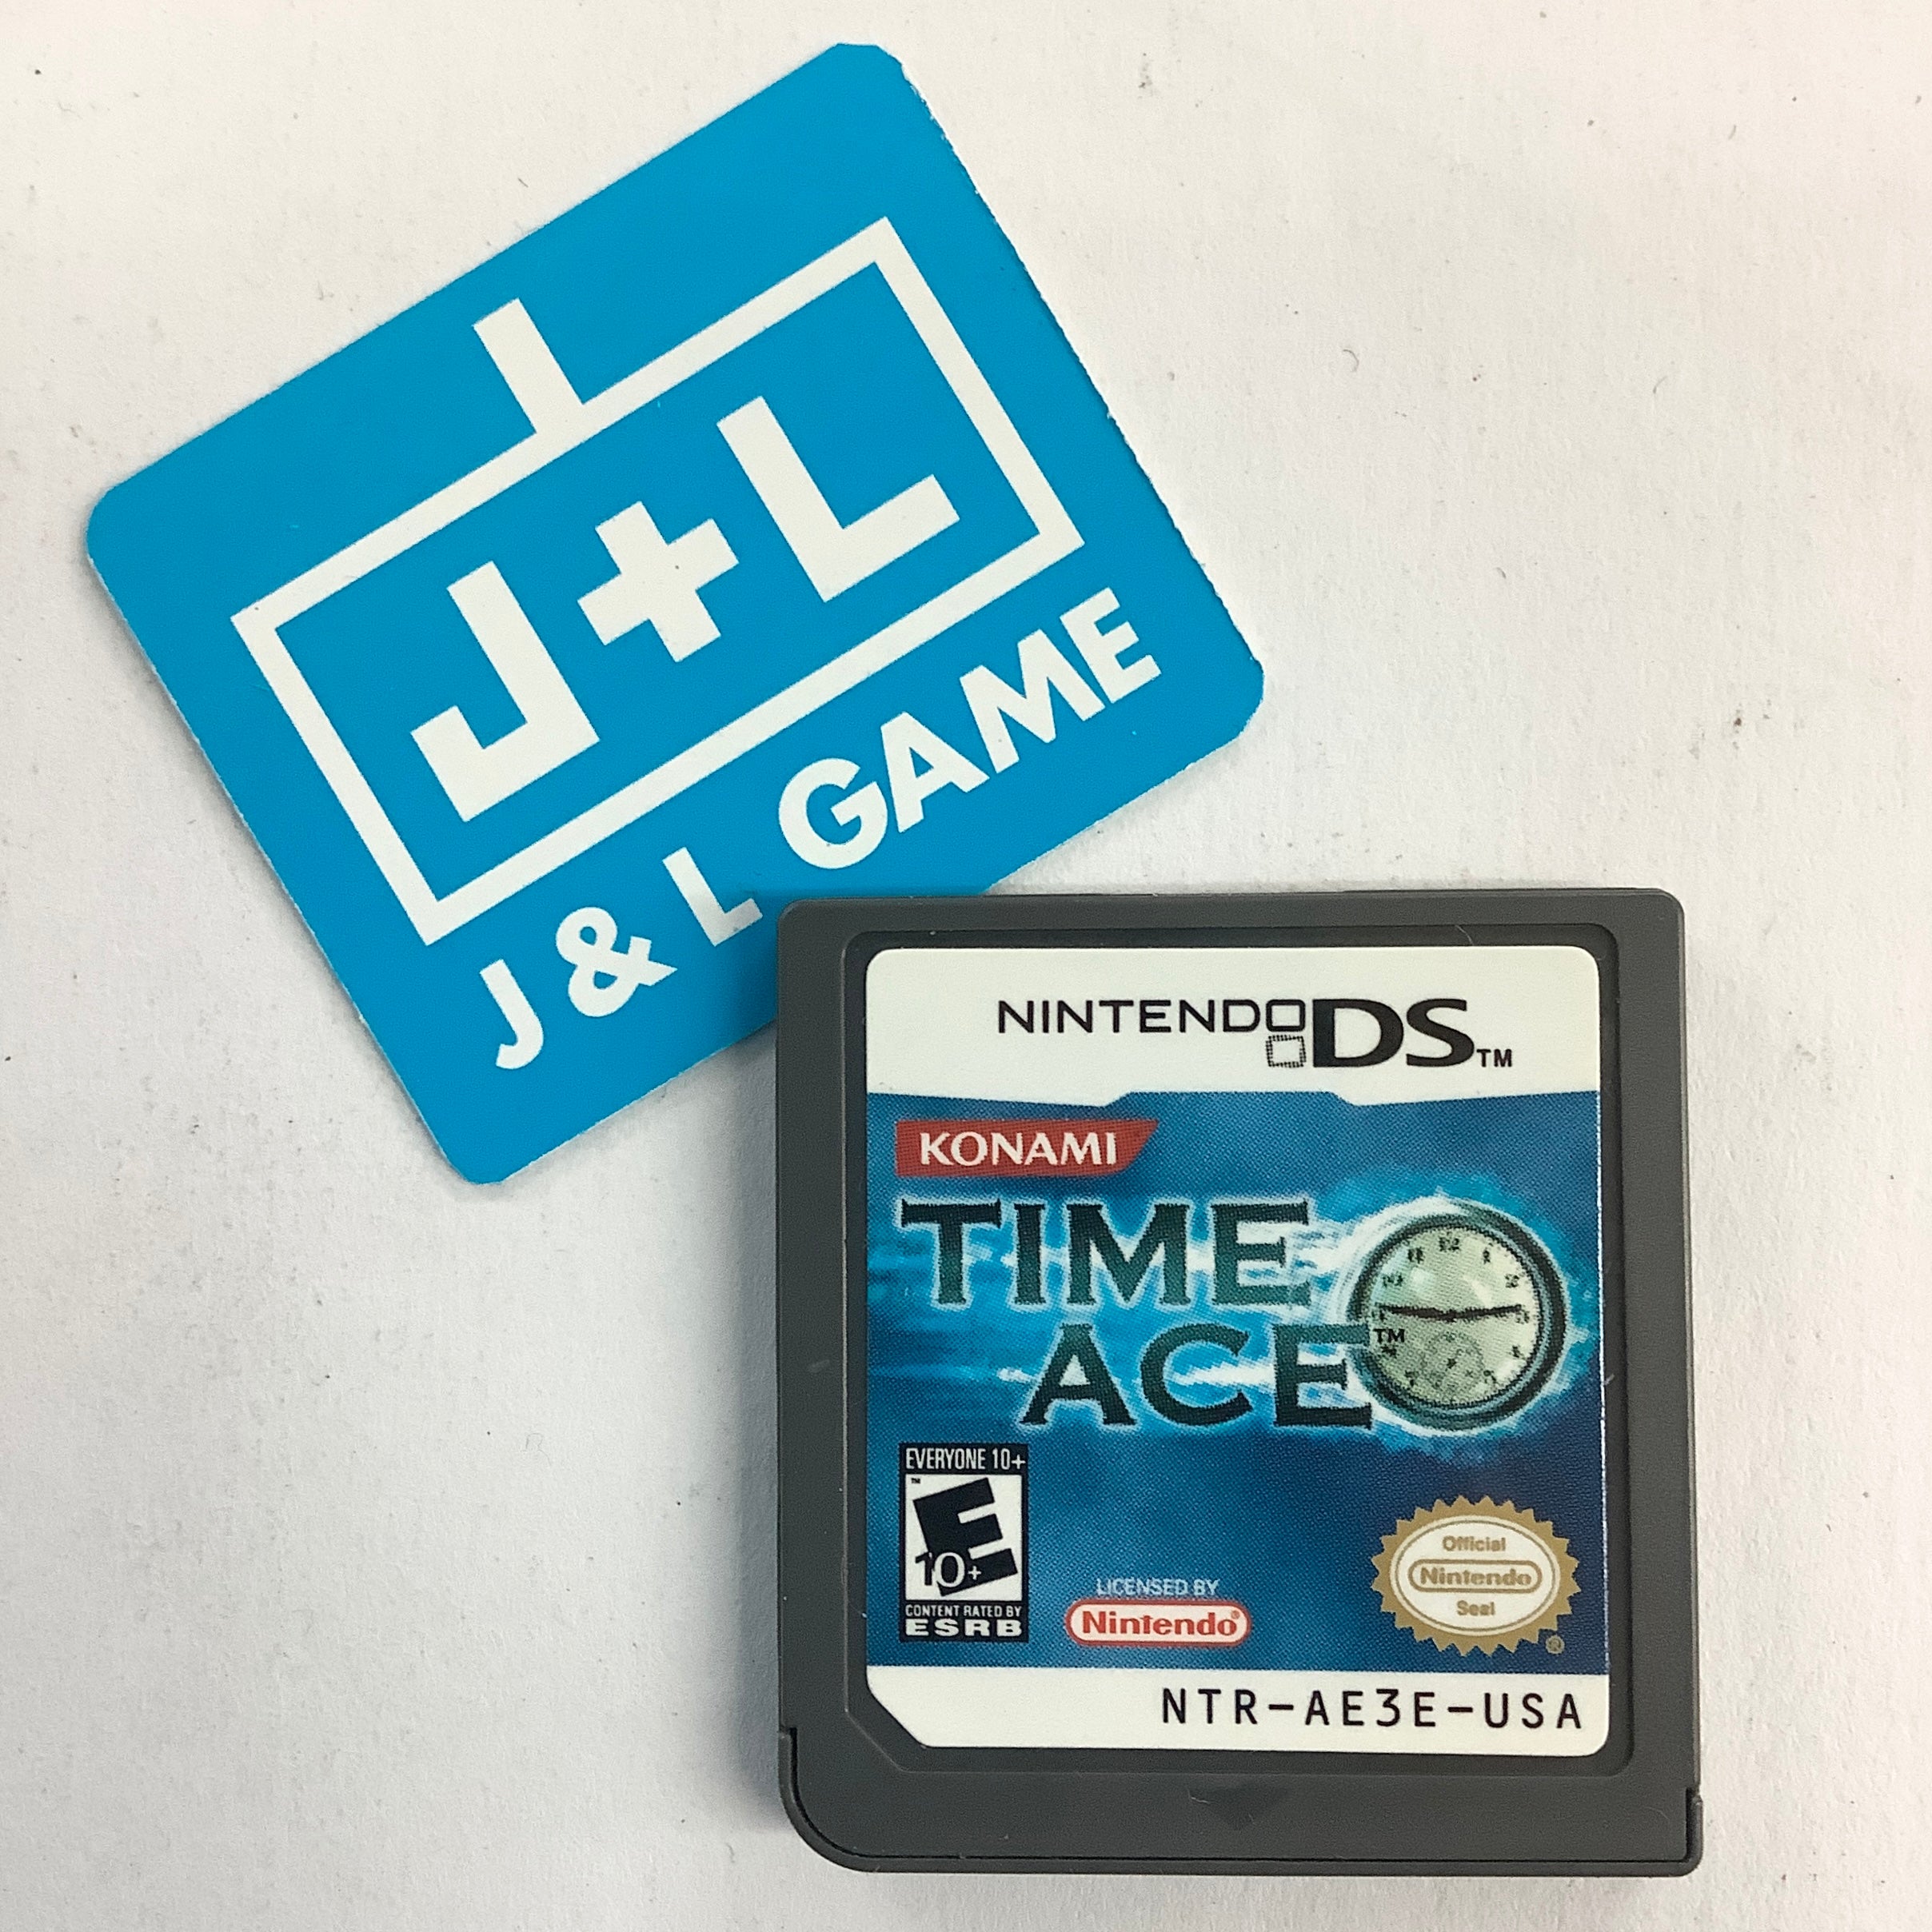 Time Ace - (NDS) Nintendo DS [Pre-Owned] Video Games Konami   